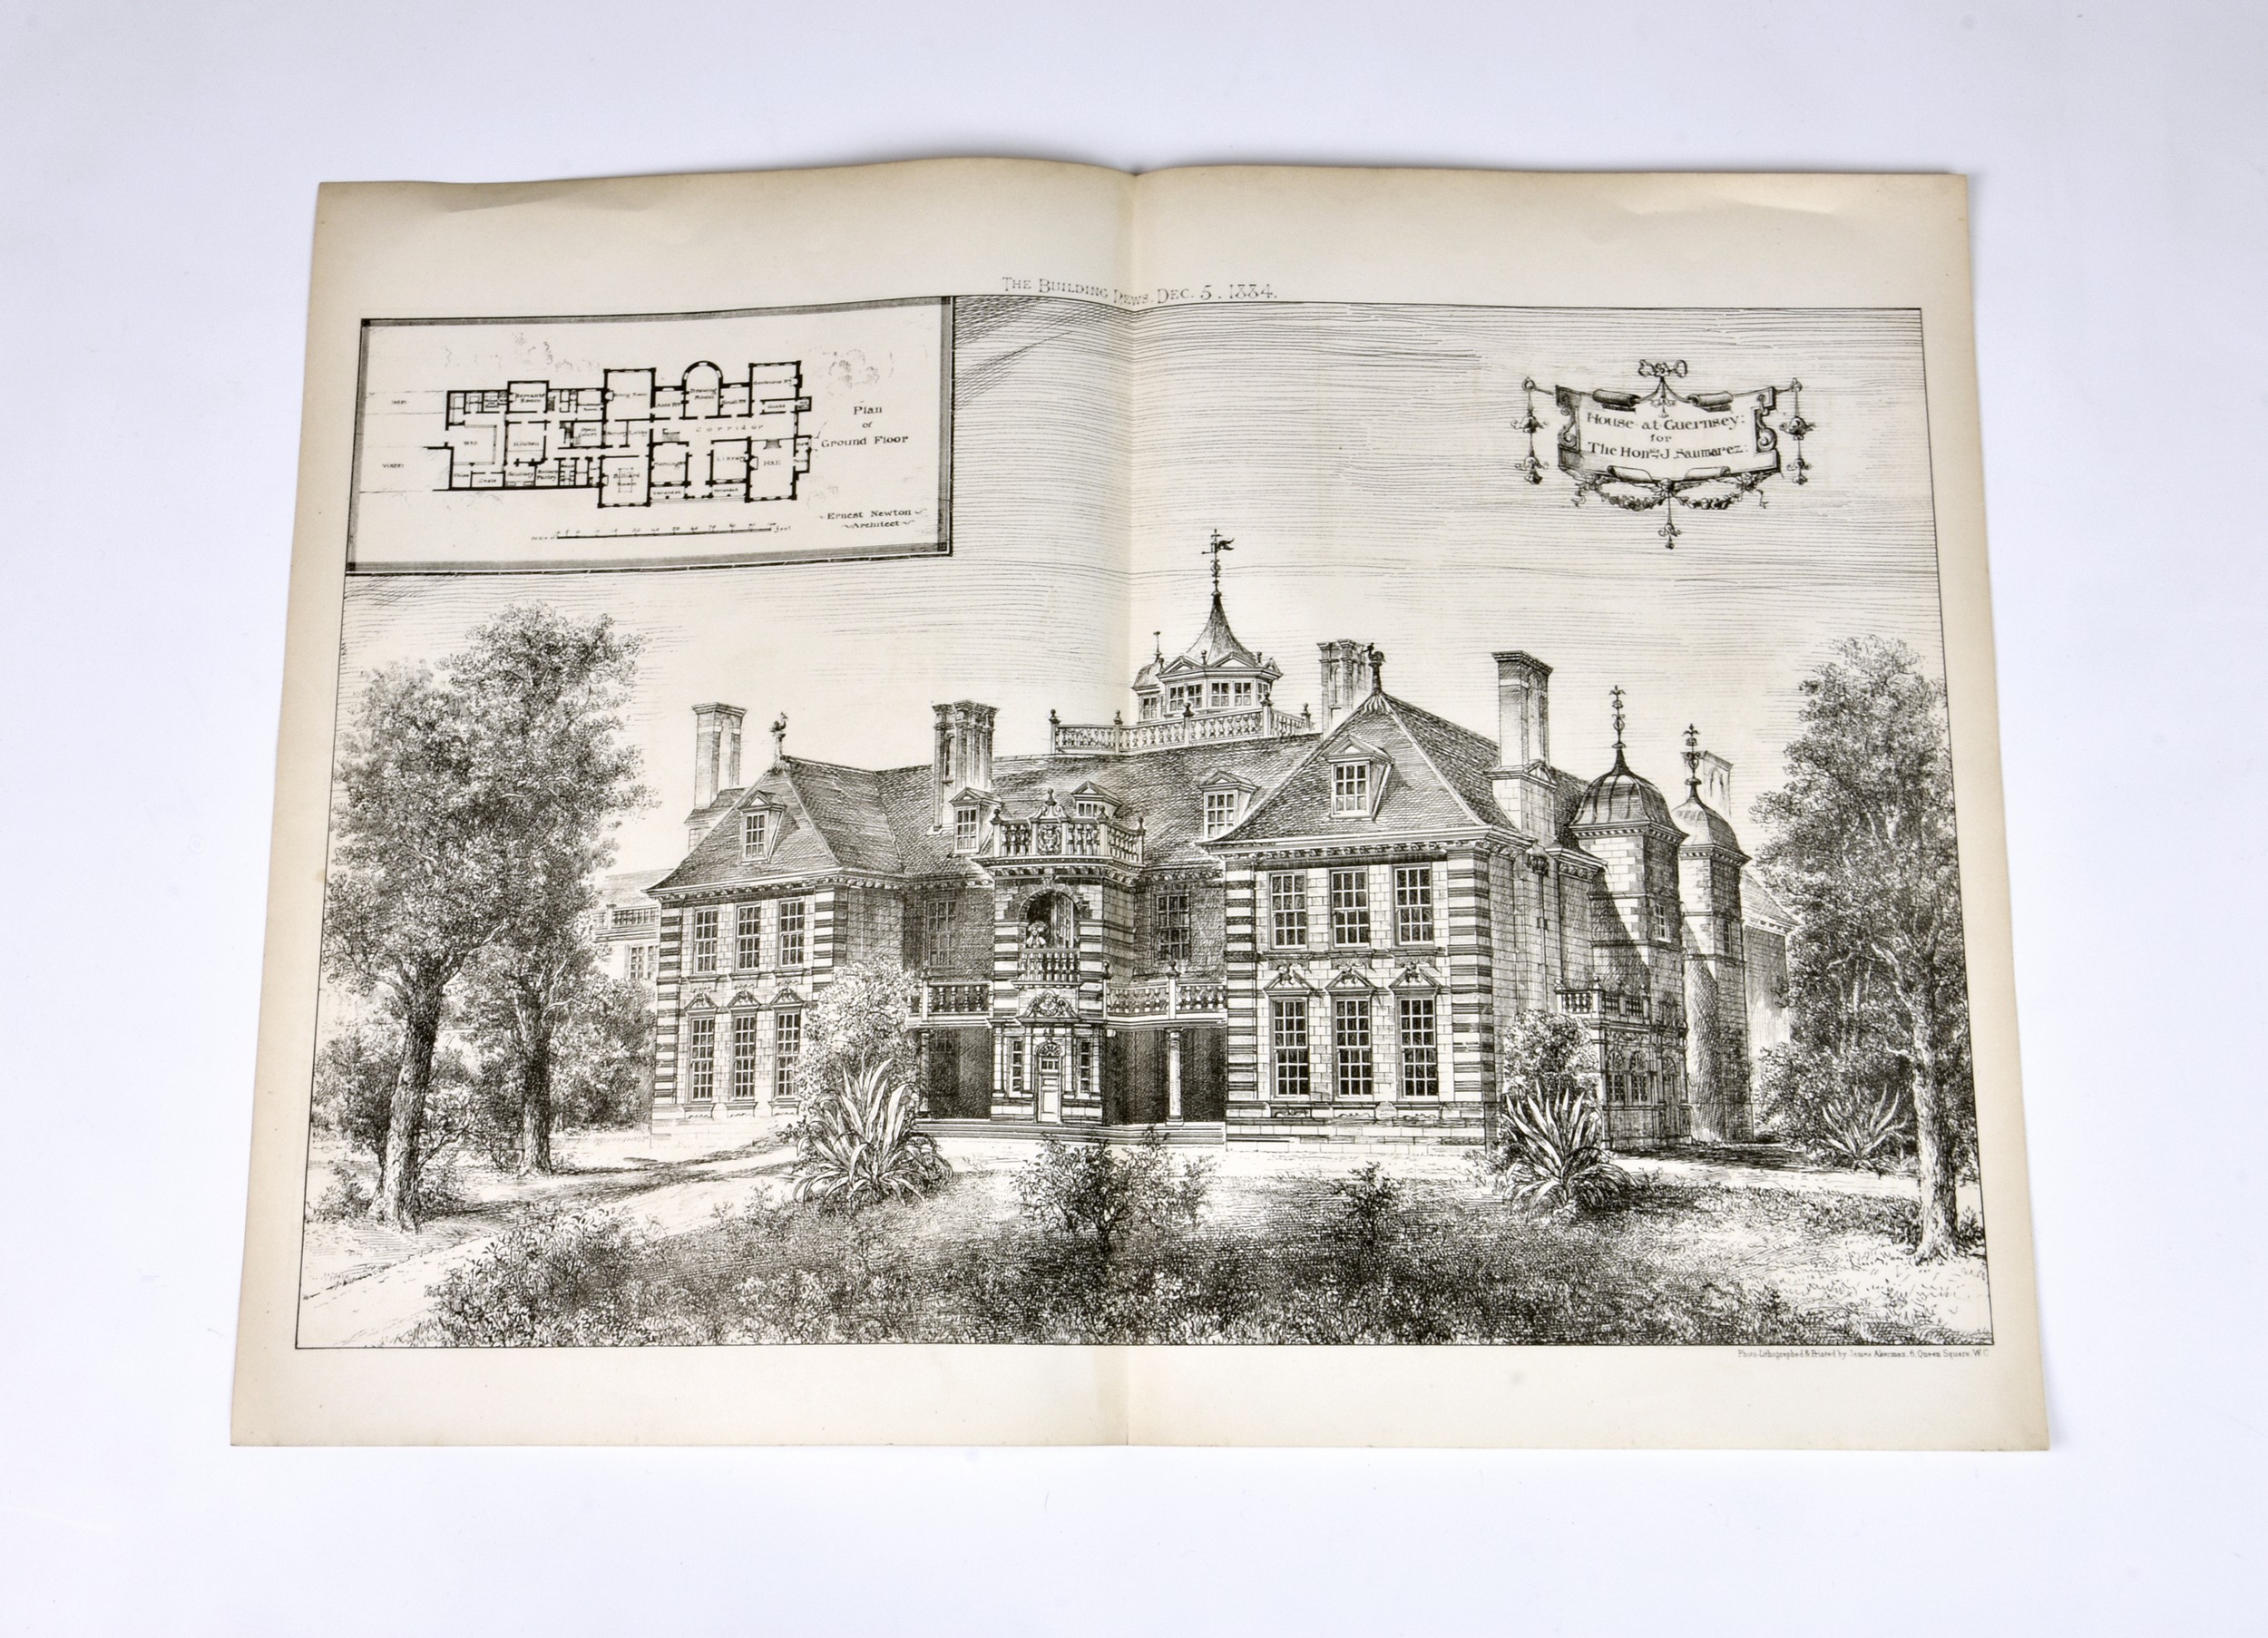 The design for Saumarez Park Manor, Guernsey by the architect Ernest Newton, titled ‘House at